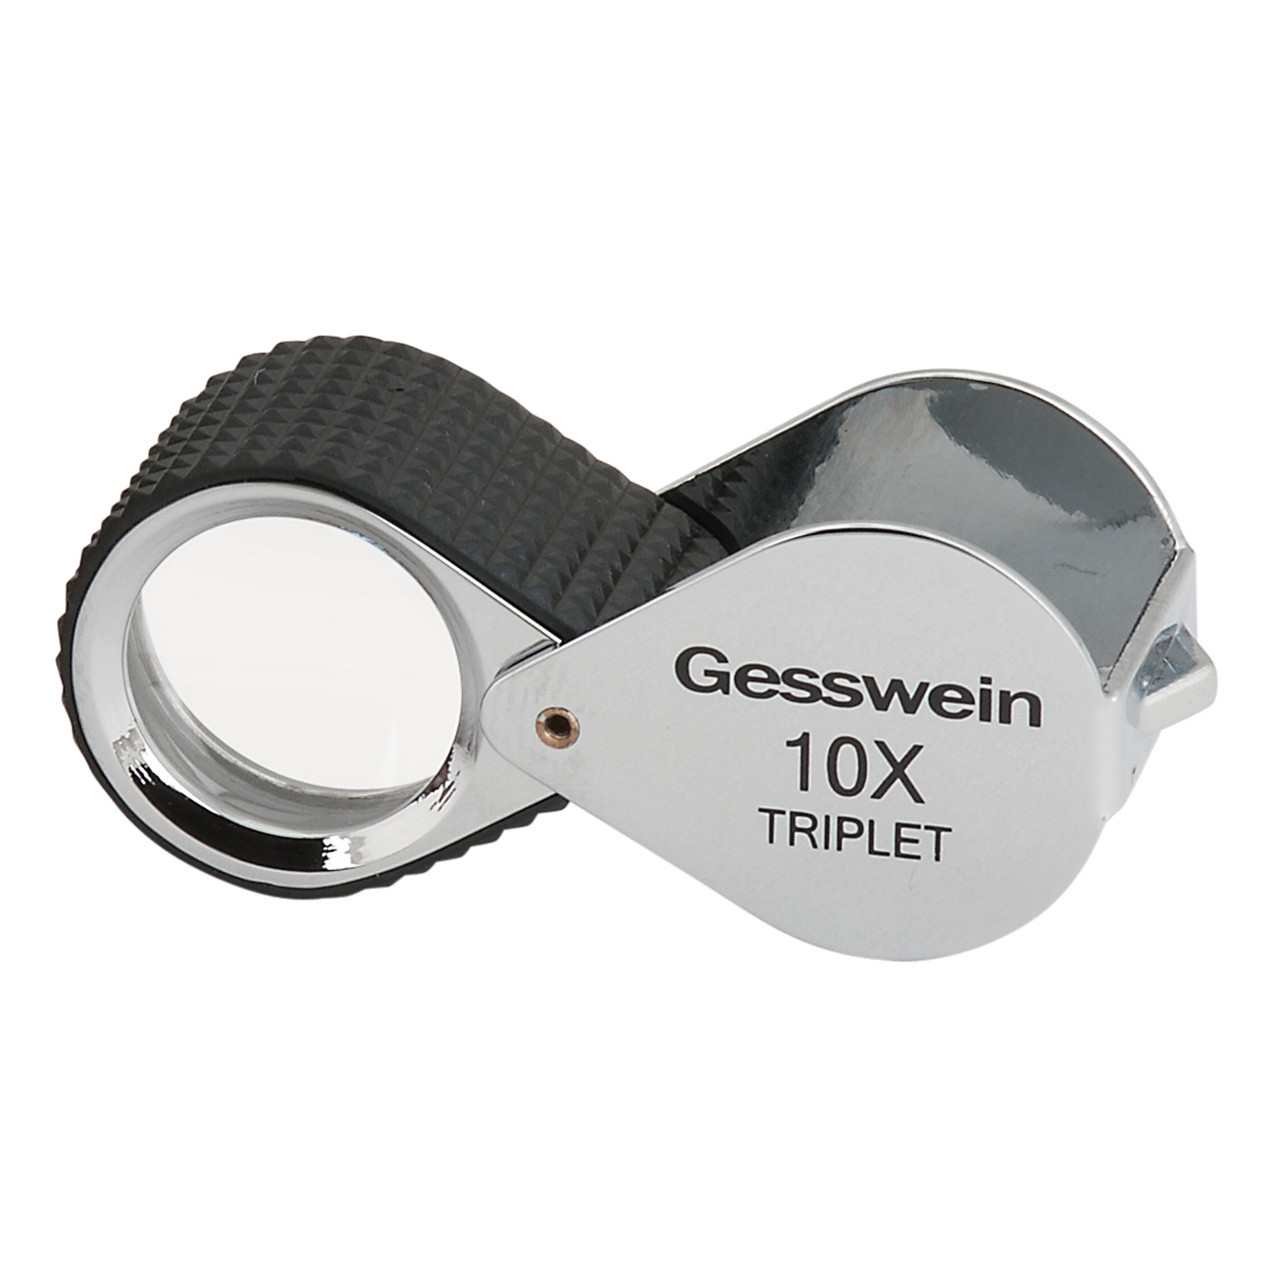 Jewelers Loupe Triplet Glass Lens, 18 mm, Silver-Black, Rubber Grip